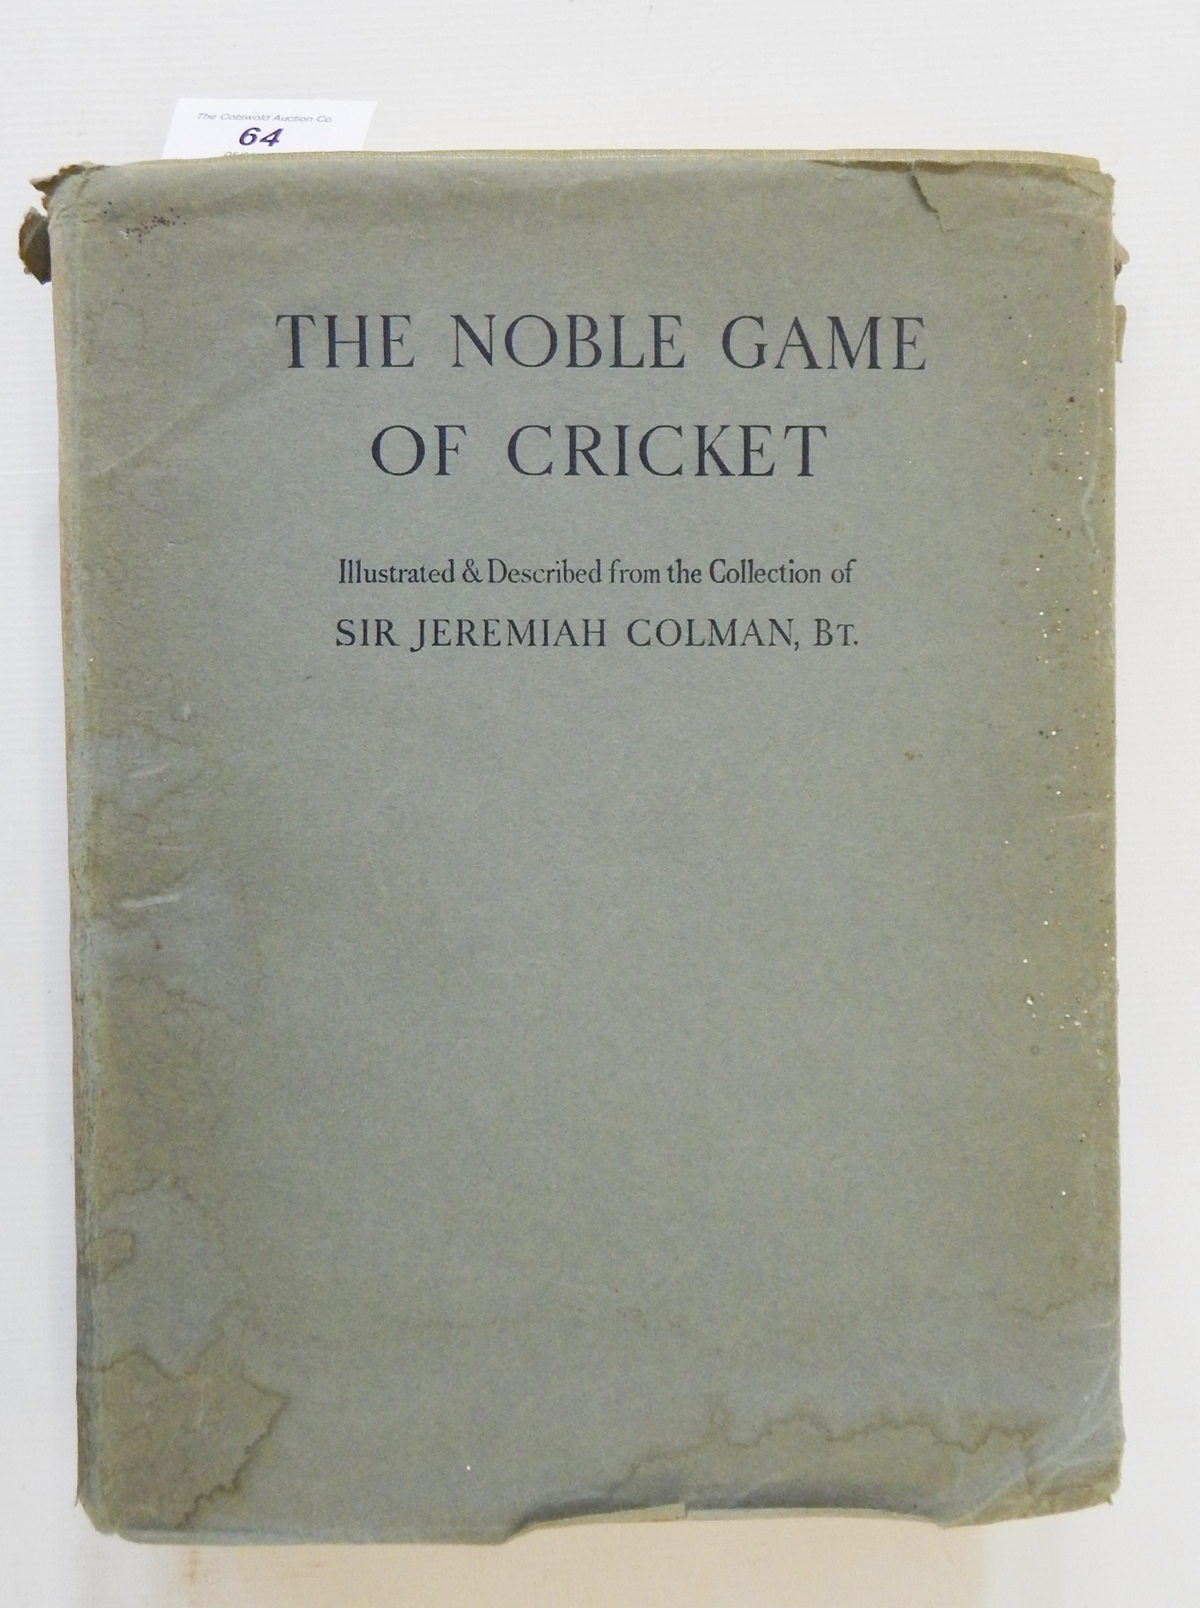 Colman, Sir Jeremiah "The Noble Game of Cricket", illustrated and described from pictures,